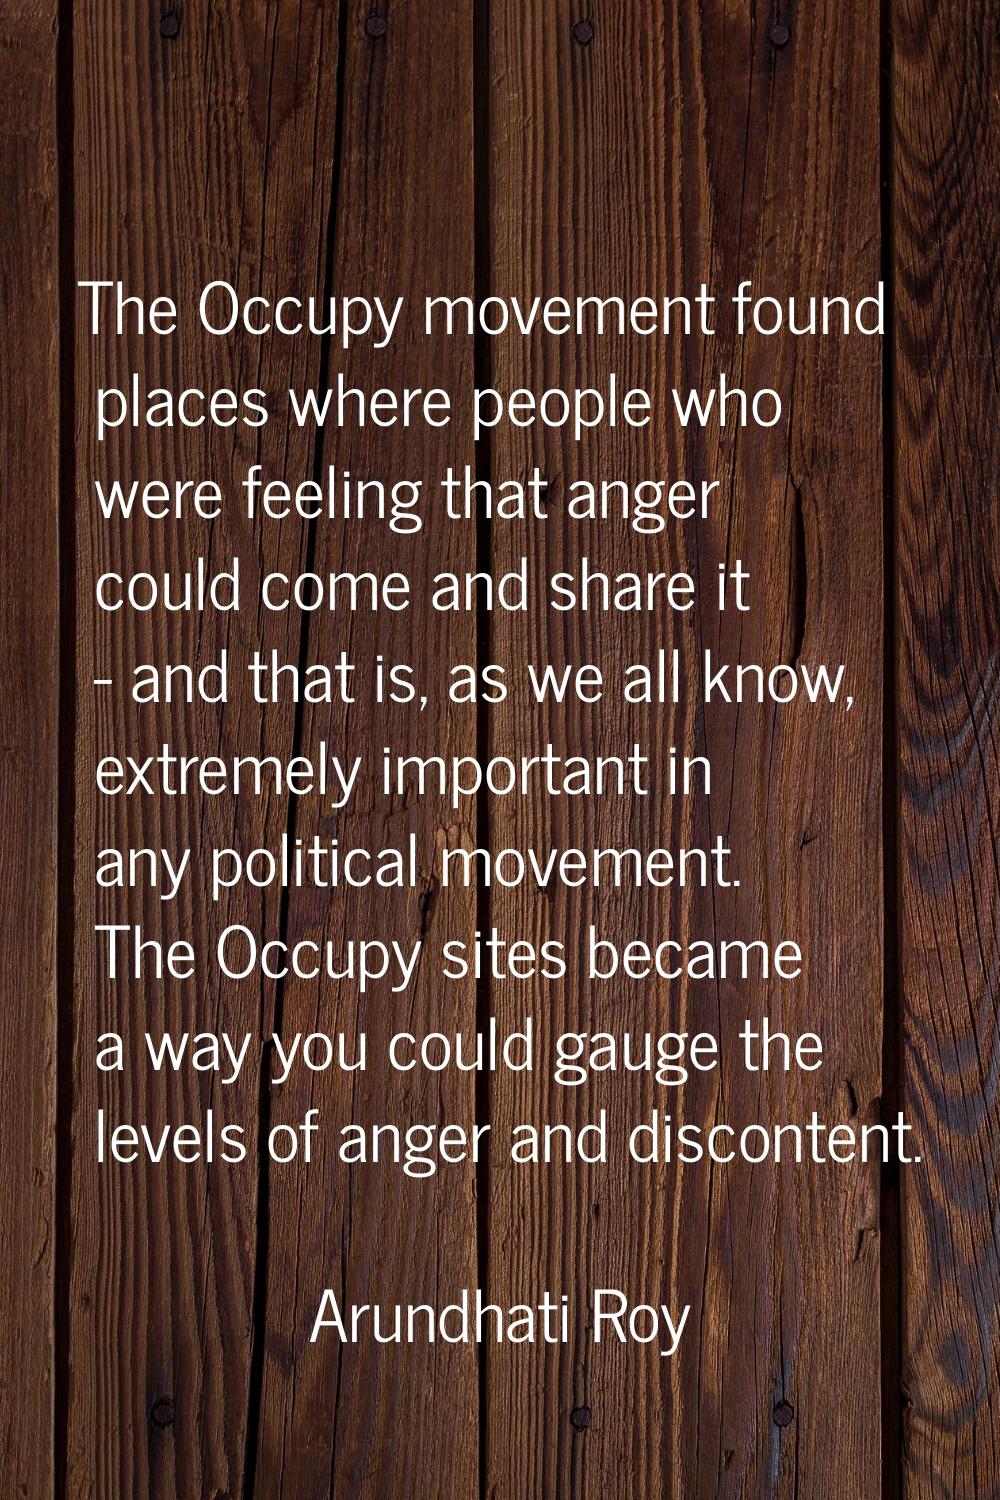 The Occupy movement found places where people who were feeling that anger could come and share it -